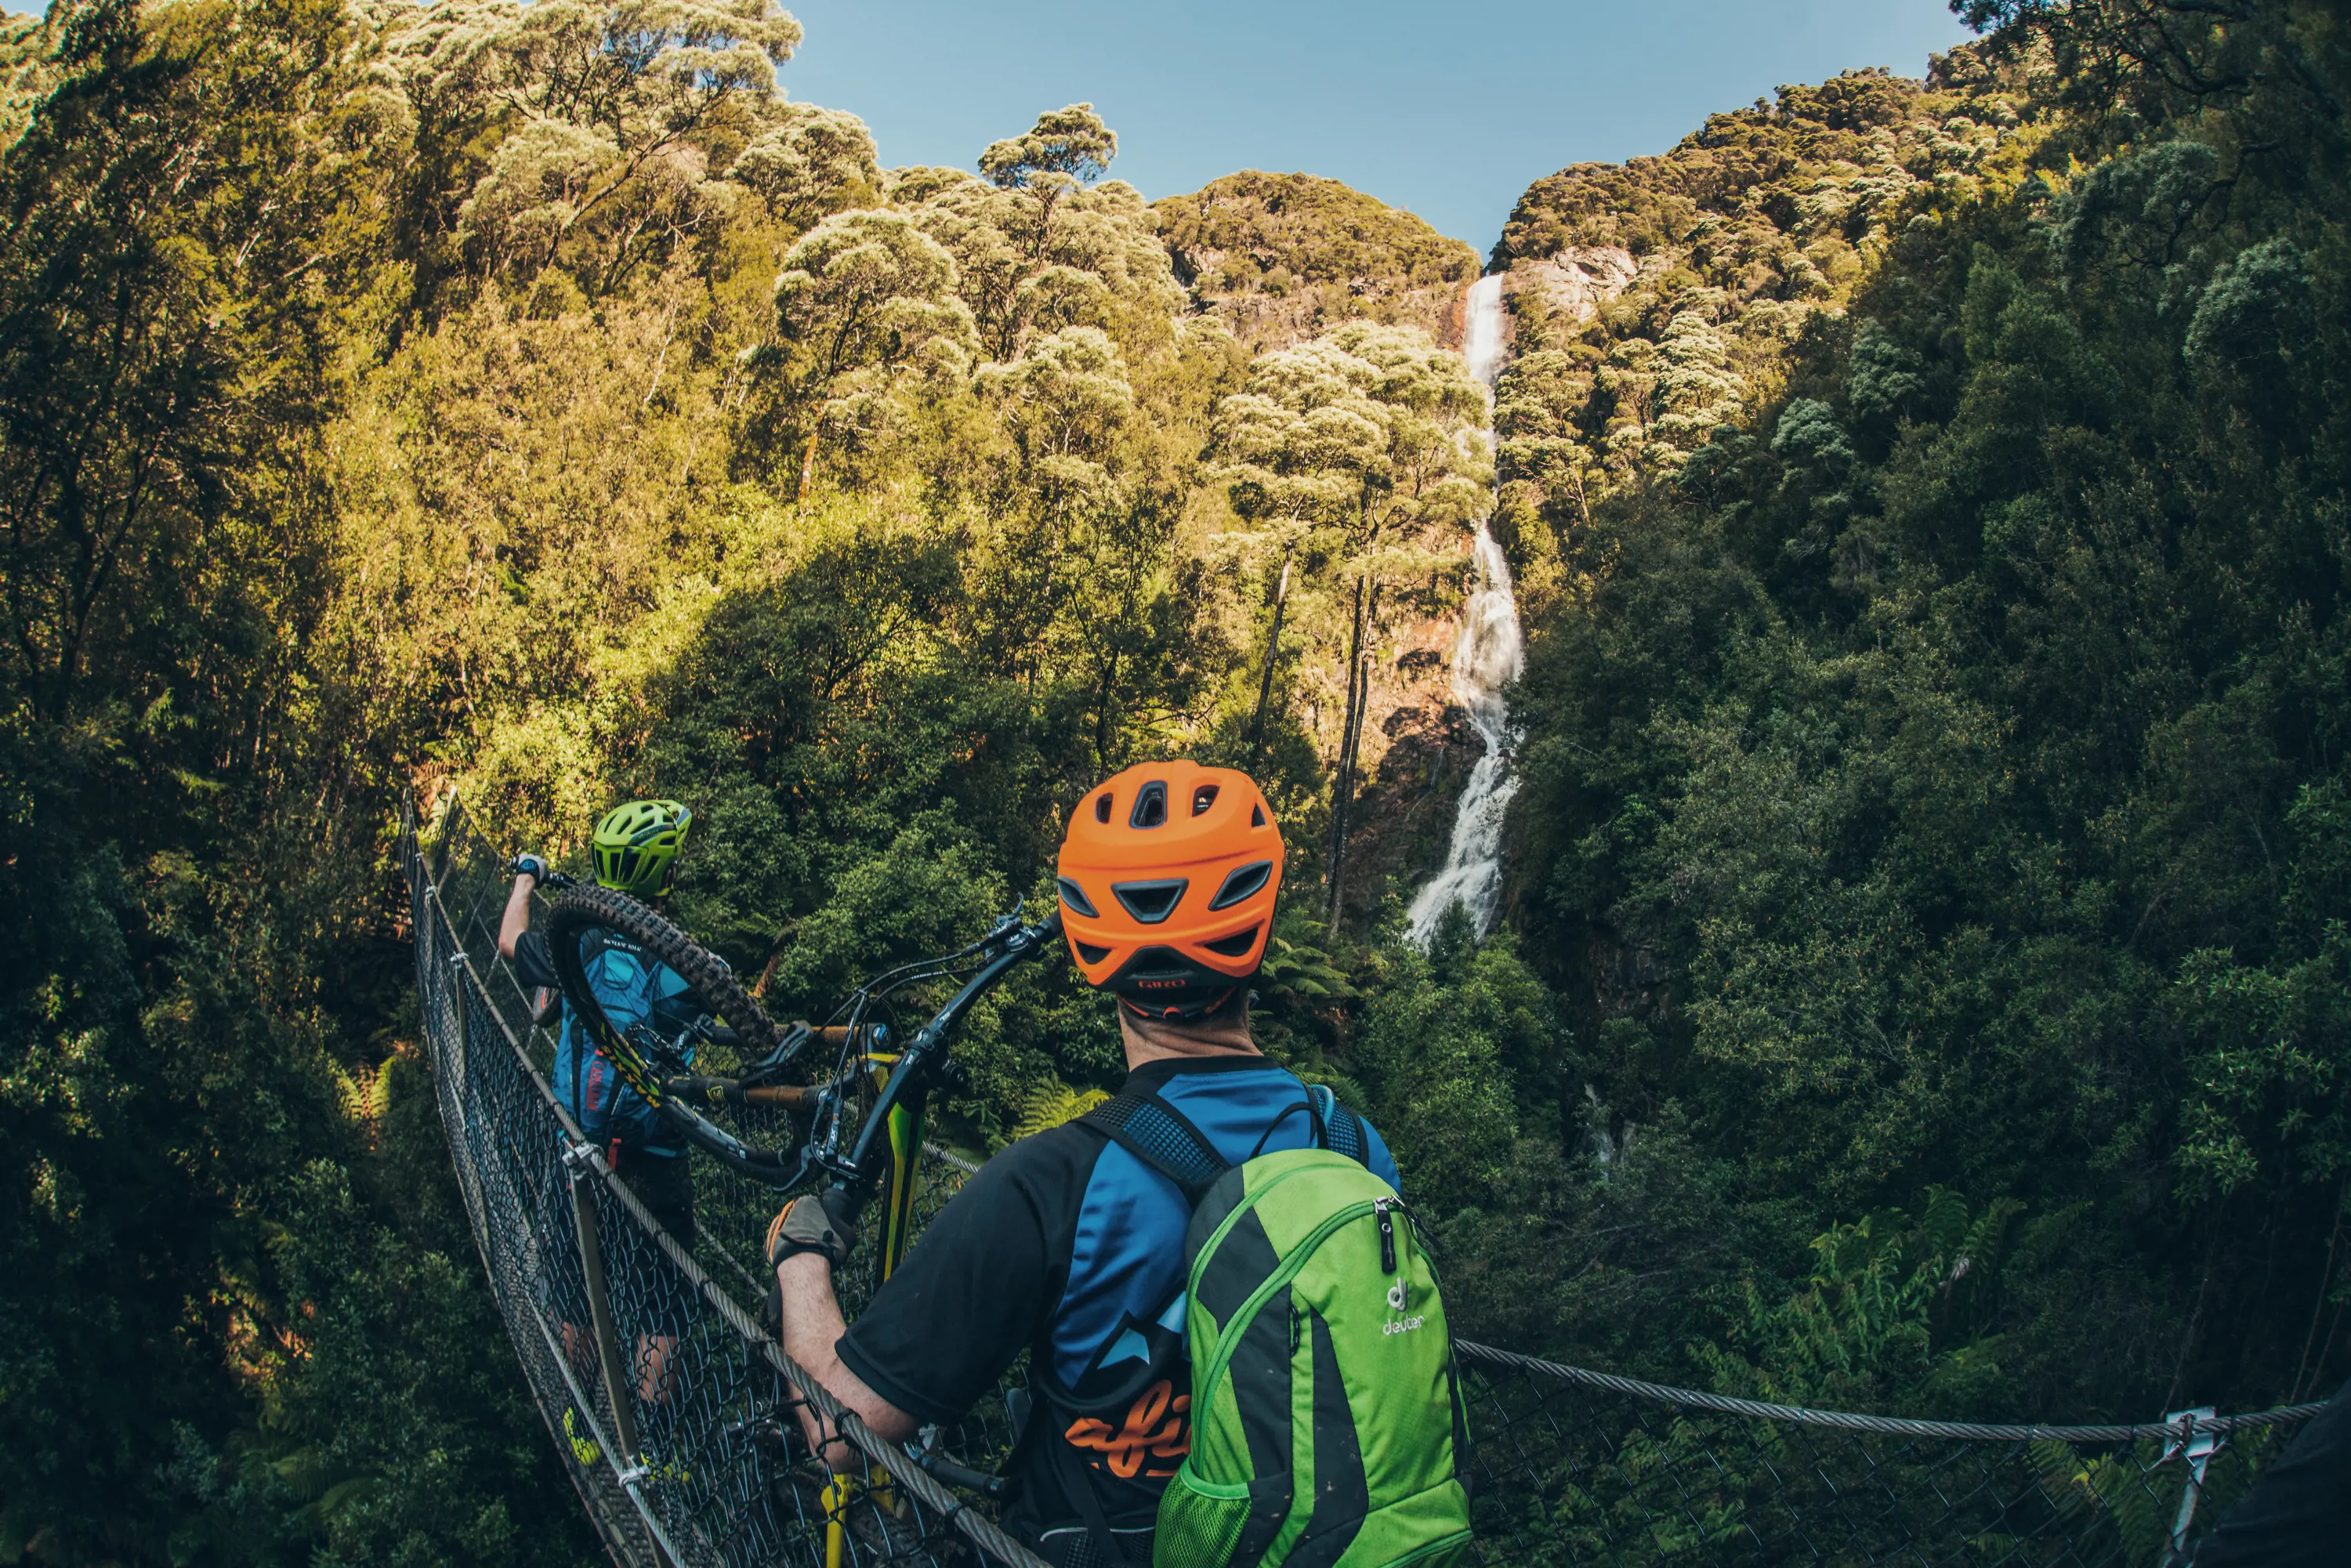 A man wearing mountain bike gear stands on a narrow suspension bridge and looks out over forest to Monetzuma Falls.